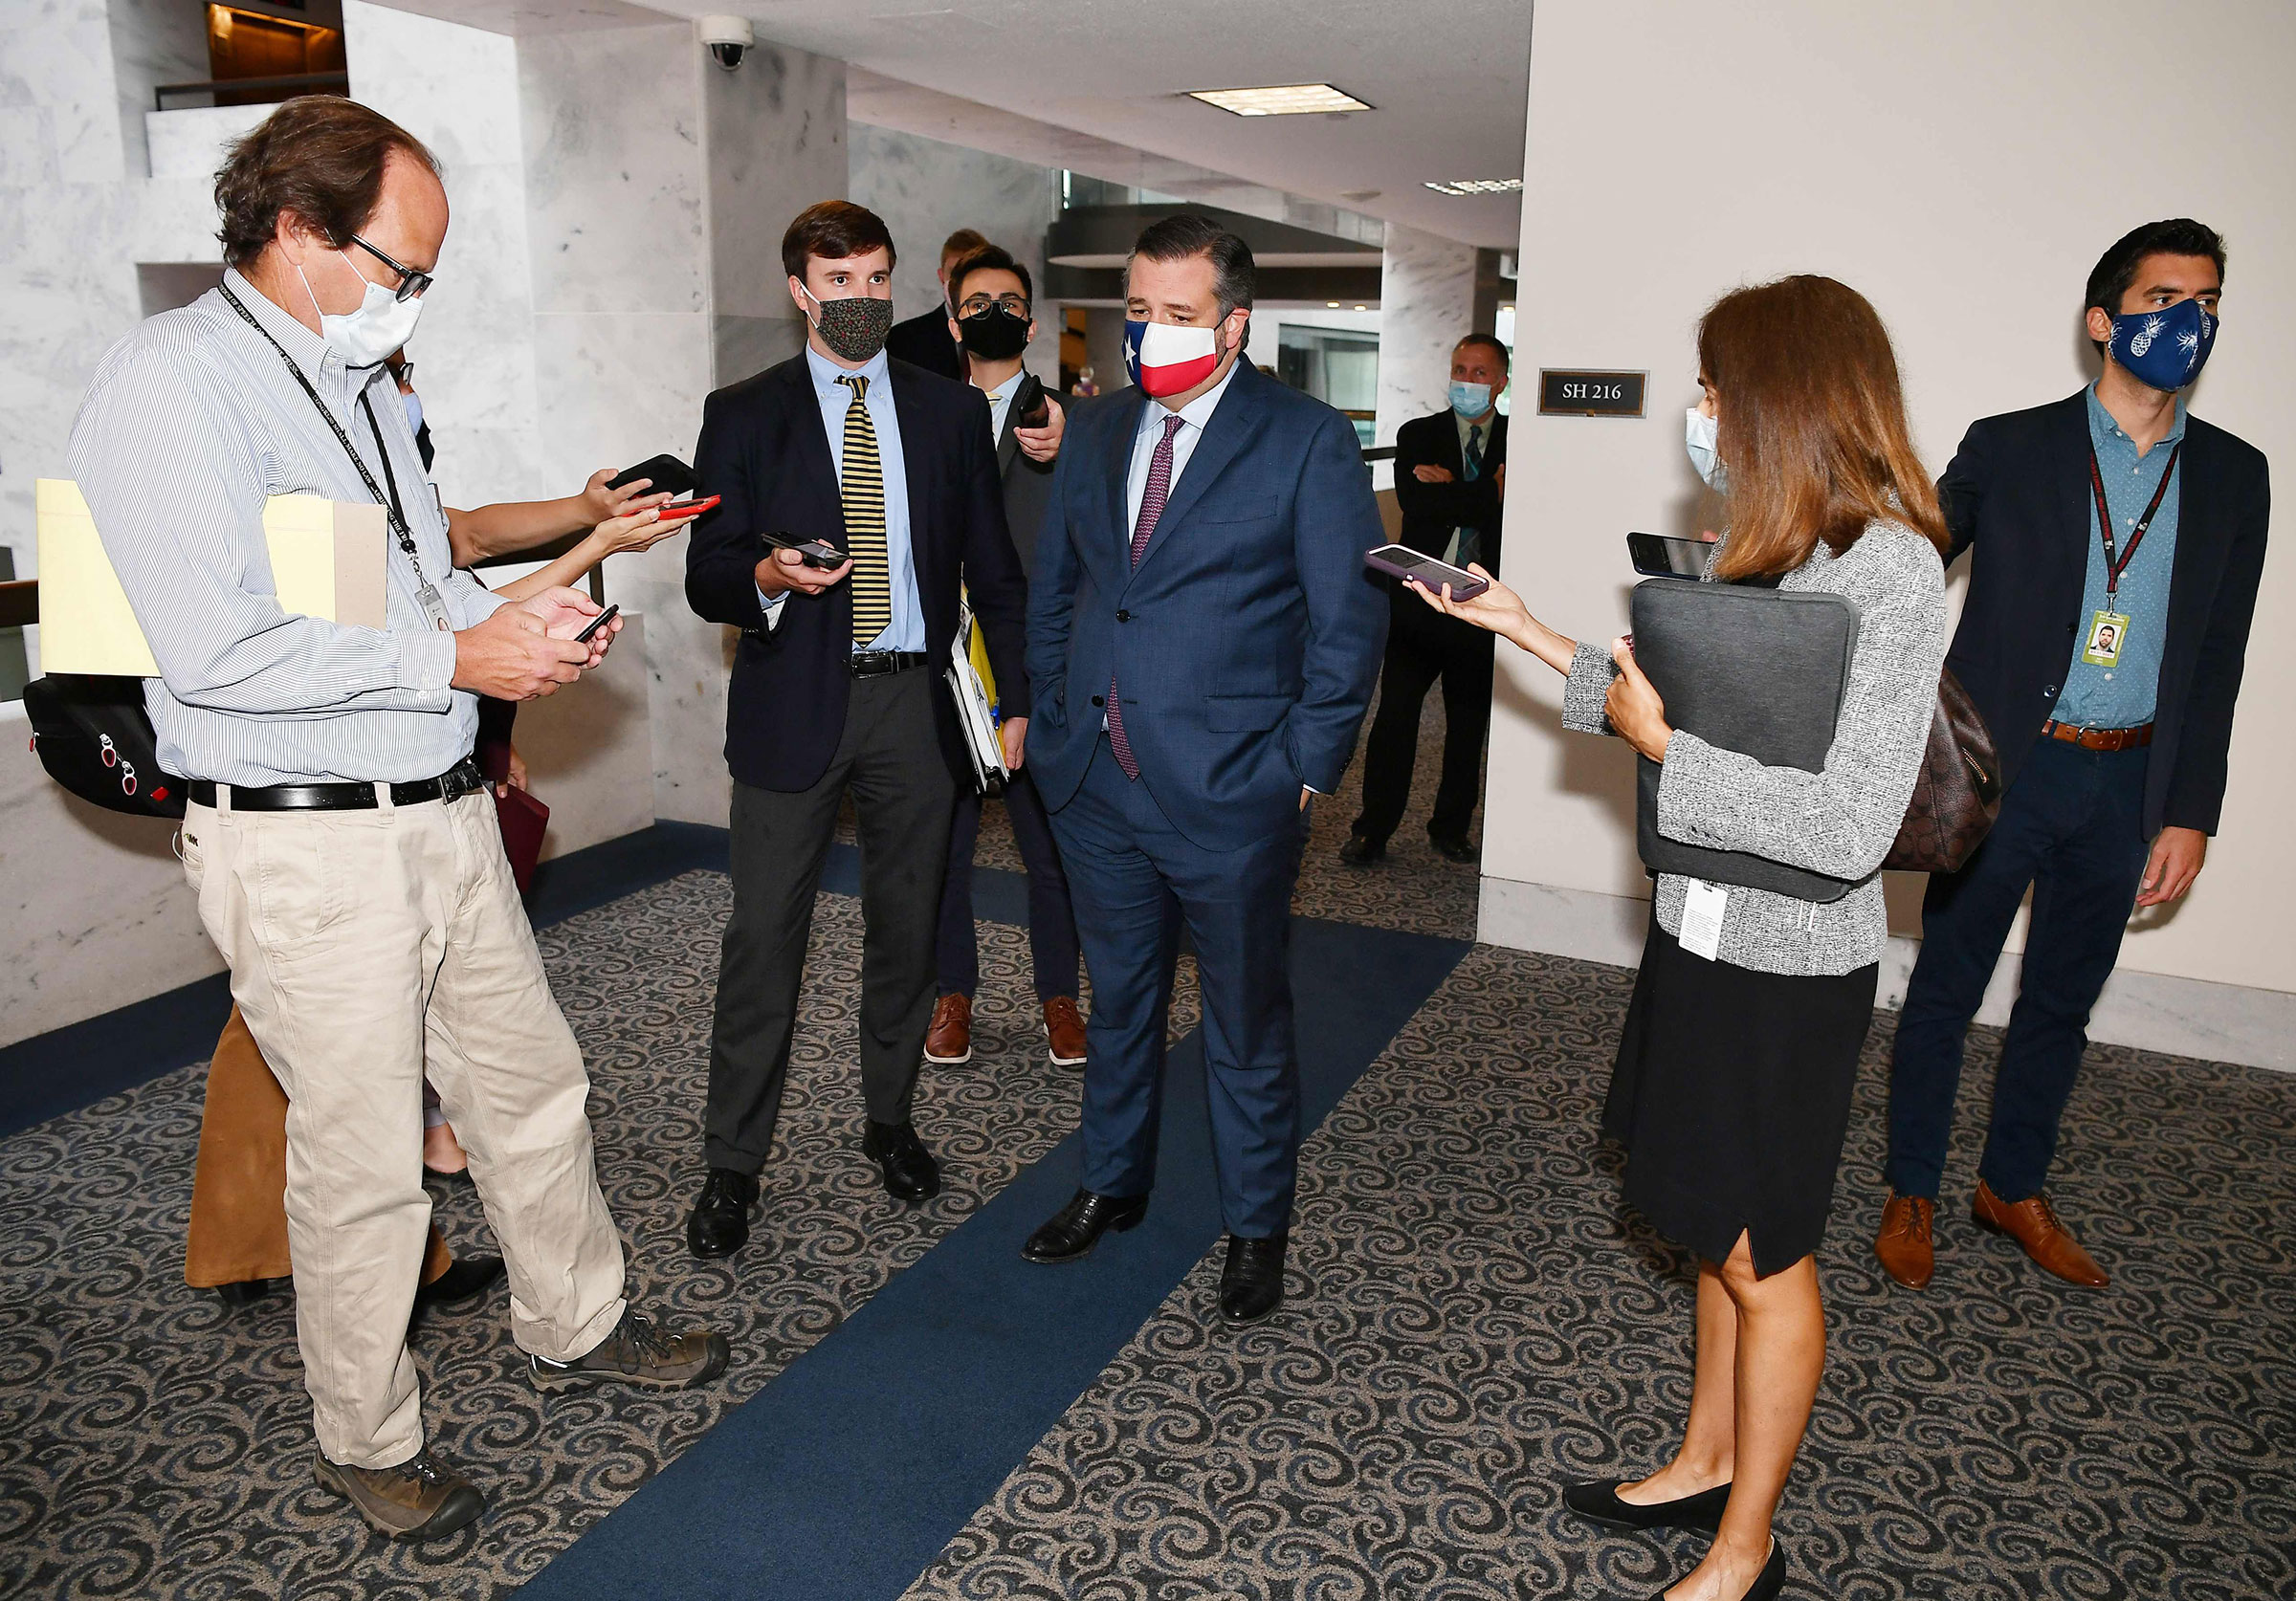 Senator Ted Cruz arrives for the Senate Republican luncheon at the Hart Senate Office Building on Capitol Hill on Aug. 4, 2020.